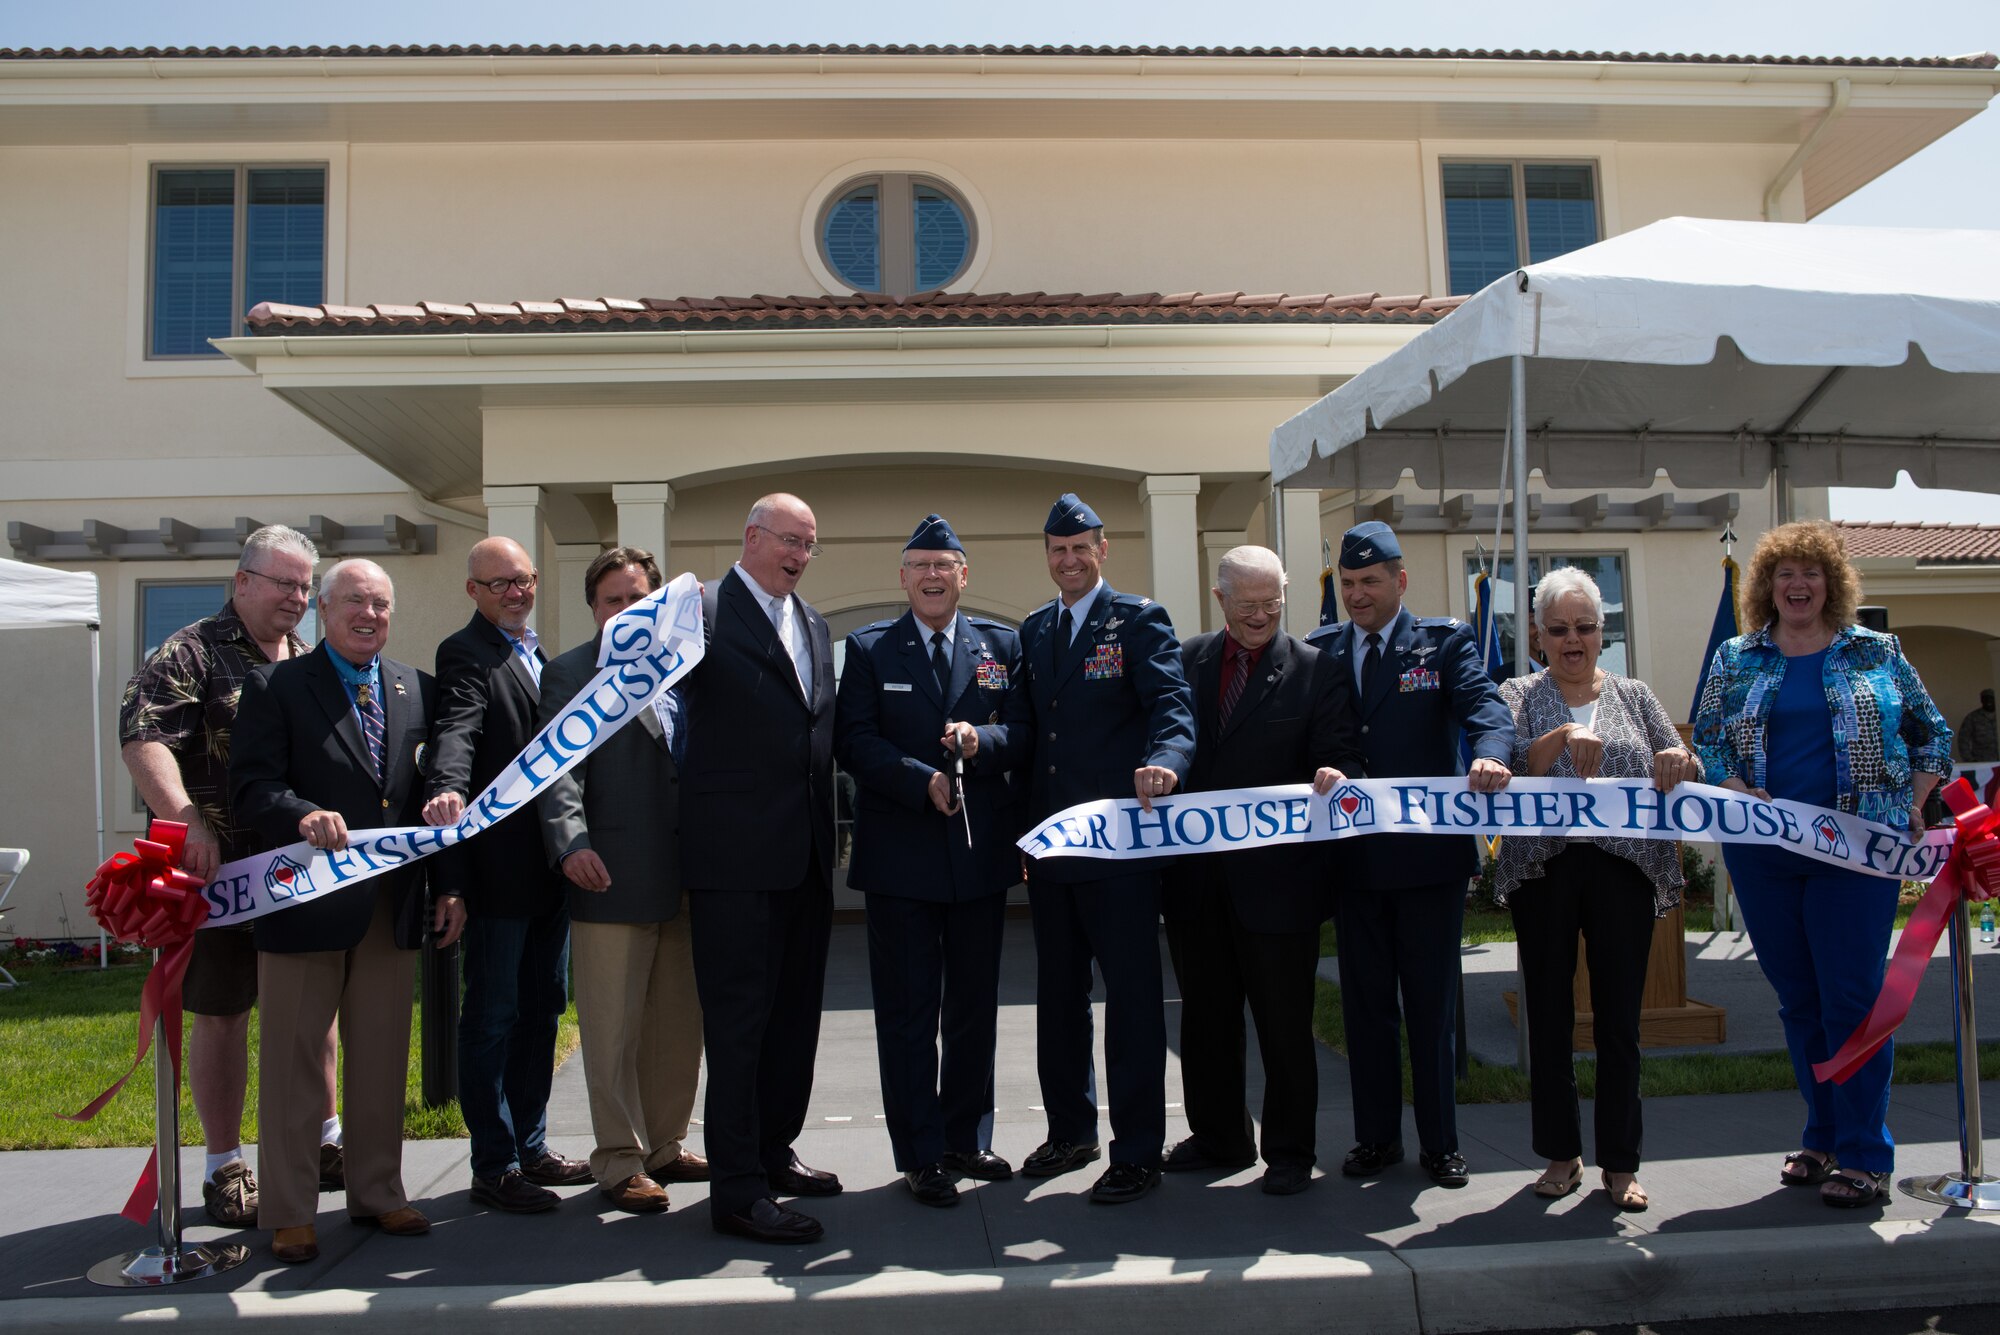 Brig. Gen. Charles Potter, center, Air Force assistant surgeon general, cuts a ribbon to formally open Fisher House II May 30 at Travis. Base leaders, Fisher House organizers and numerous distinguished visitors from the community celebrated the oepning of the home that will provide a place of comfort for military members, veterans and their families who are enduring health-related hardships. (U.S. Air Force photo/Ken Wright)